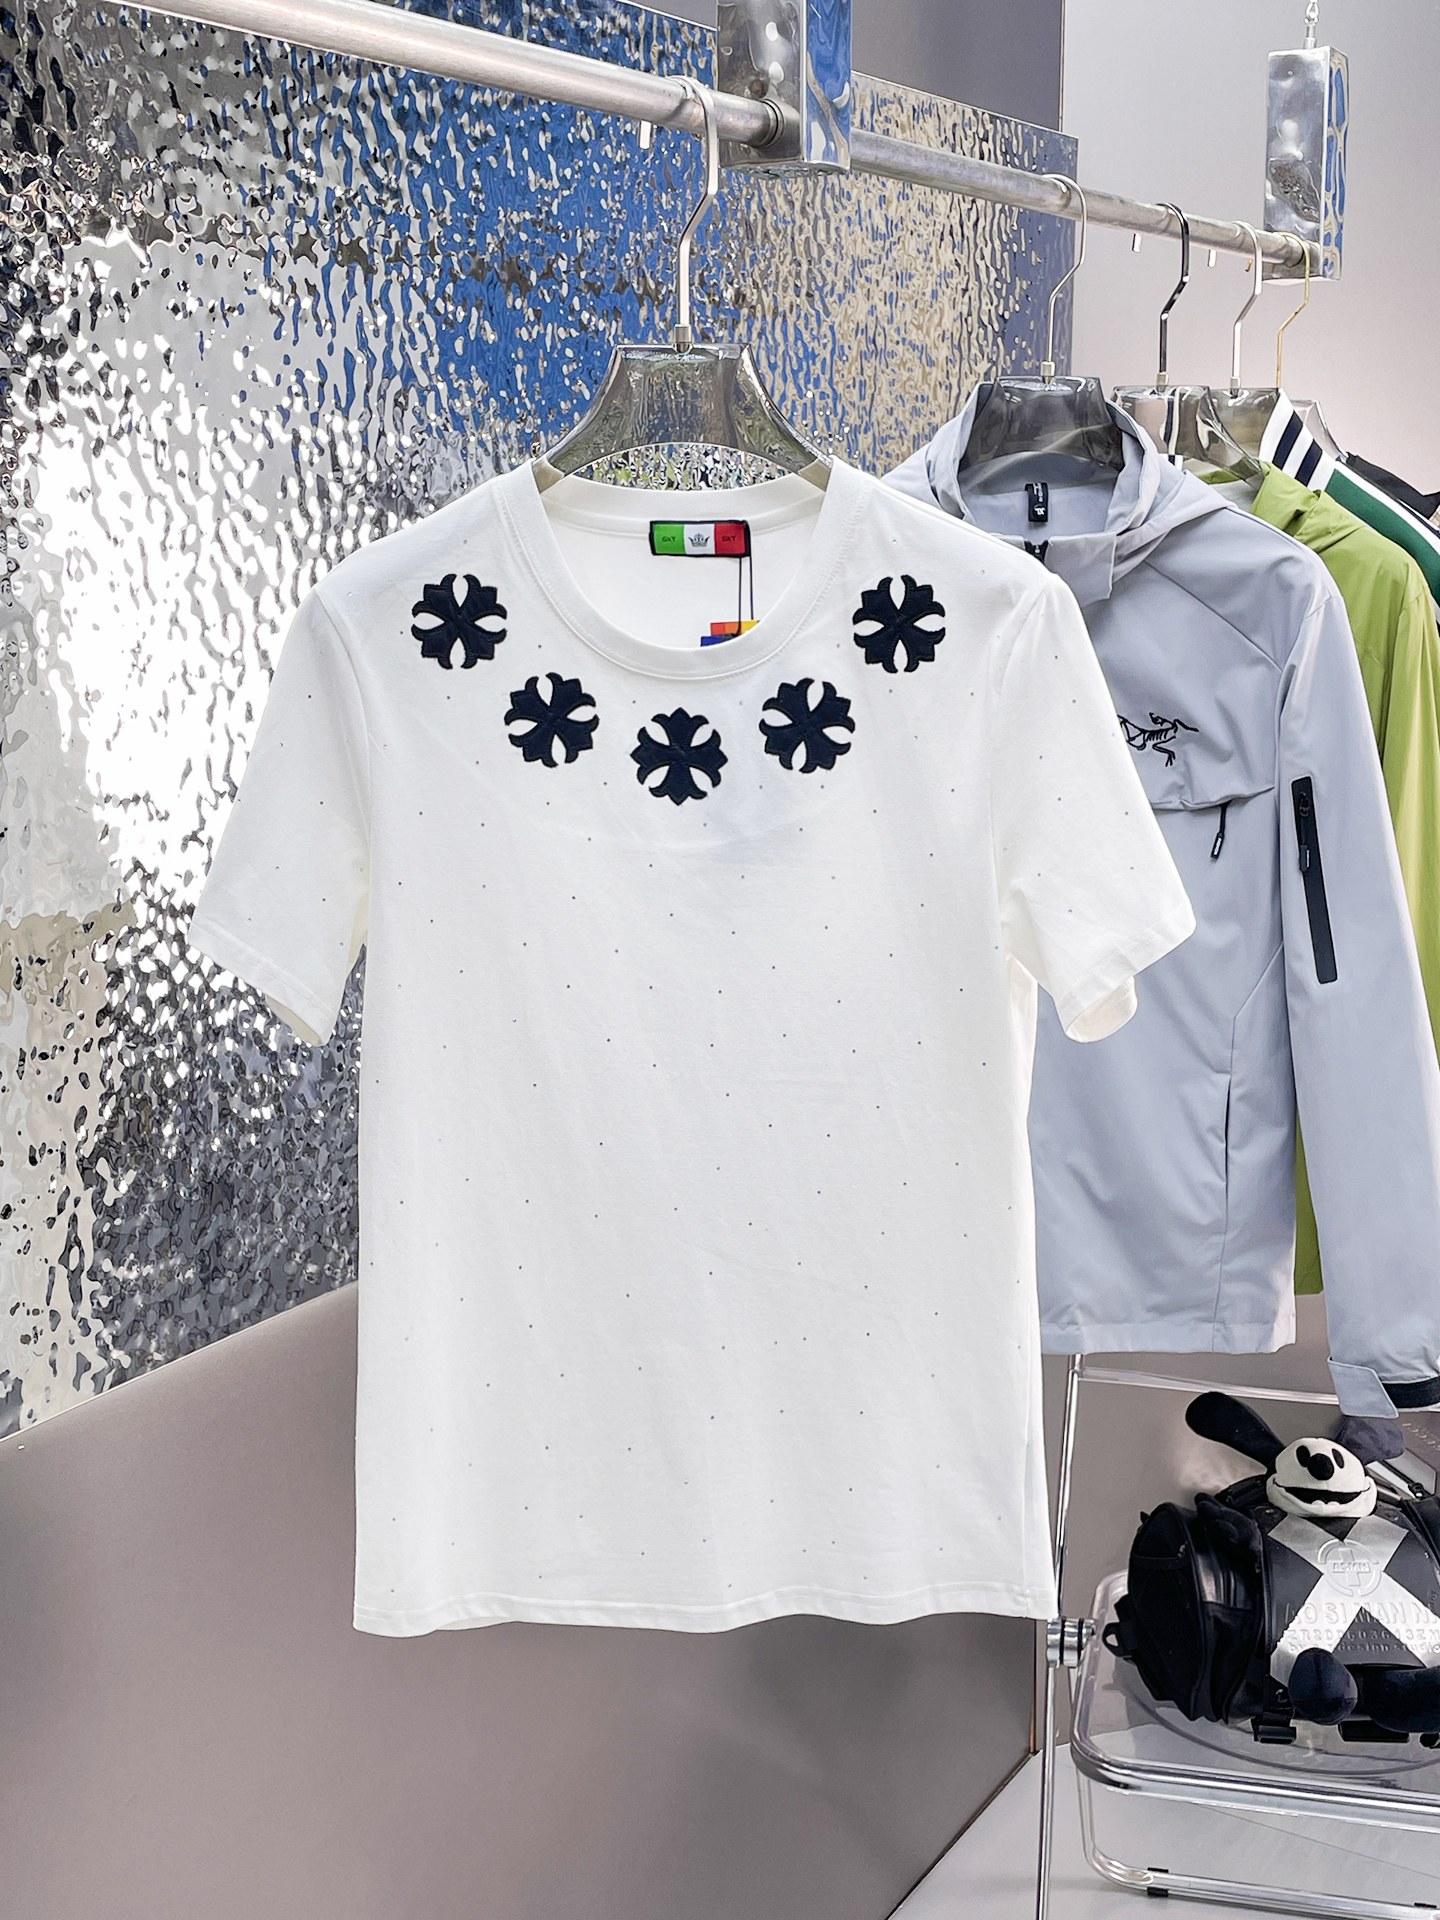 Chrome Hearts Clothing T-Shirt Summer Collection Fashion Short Sleeve